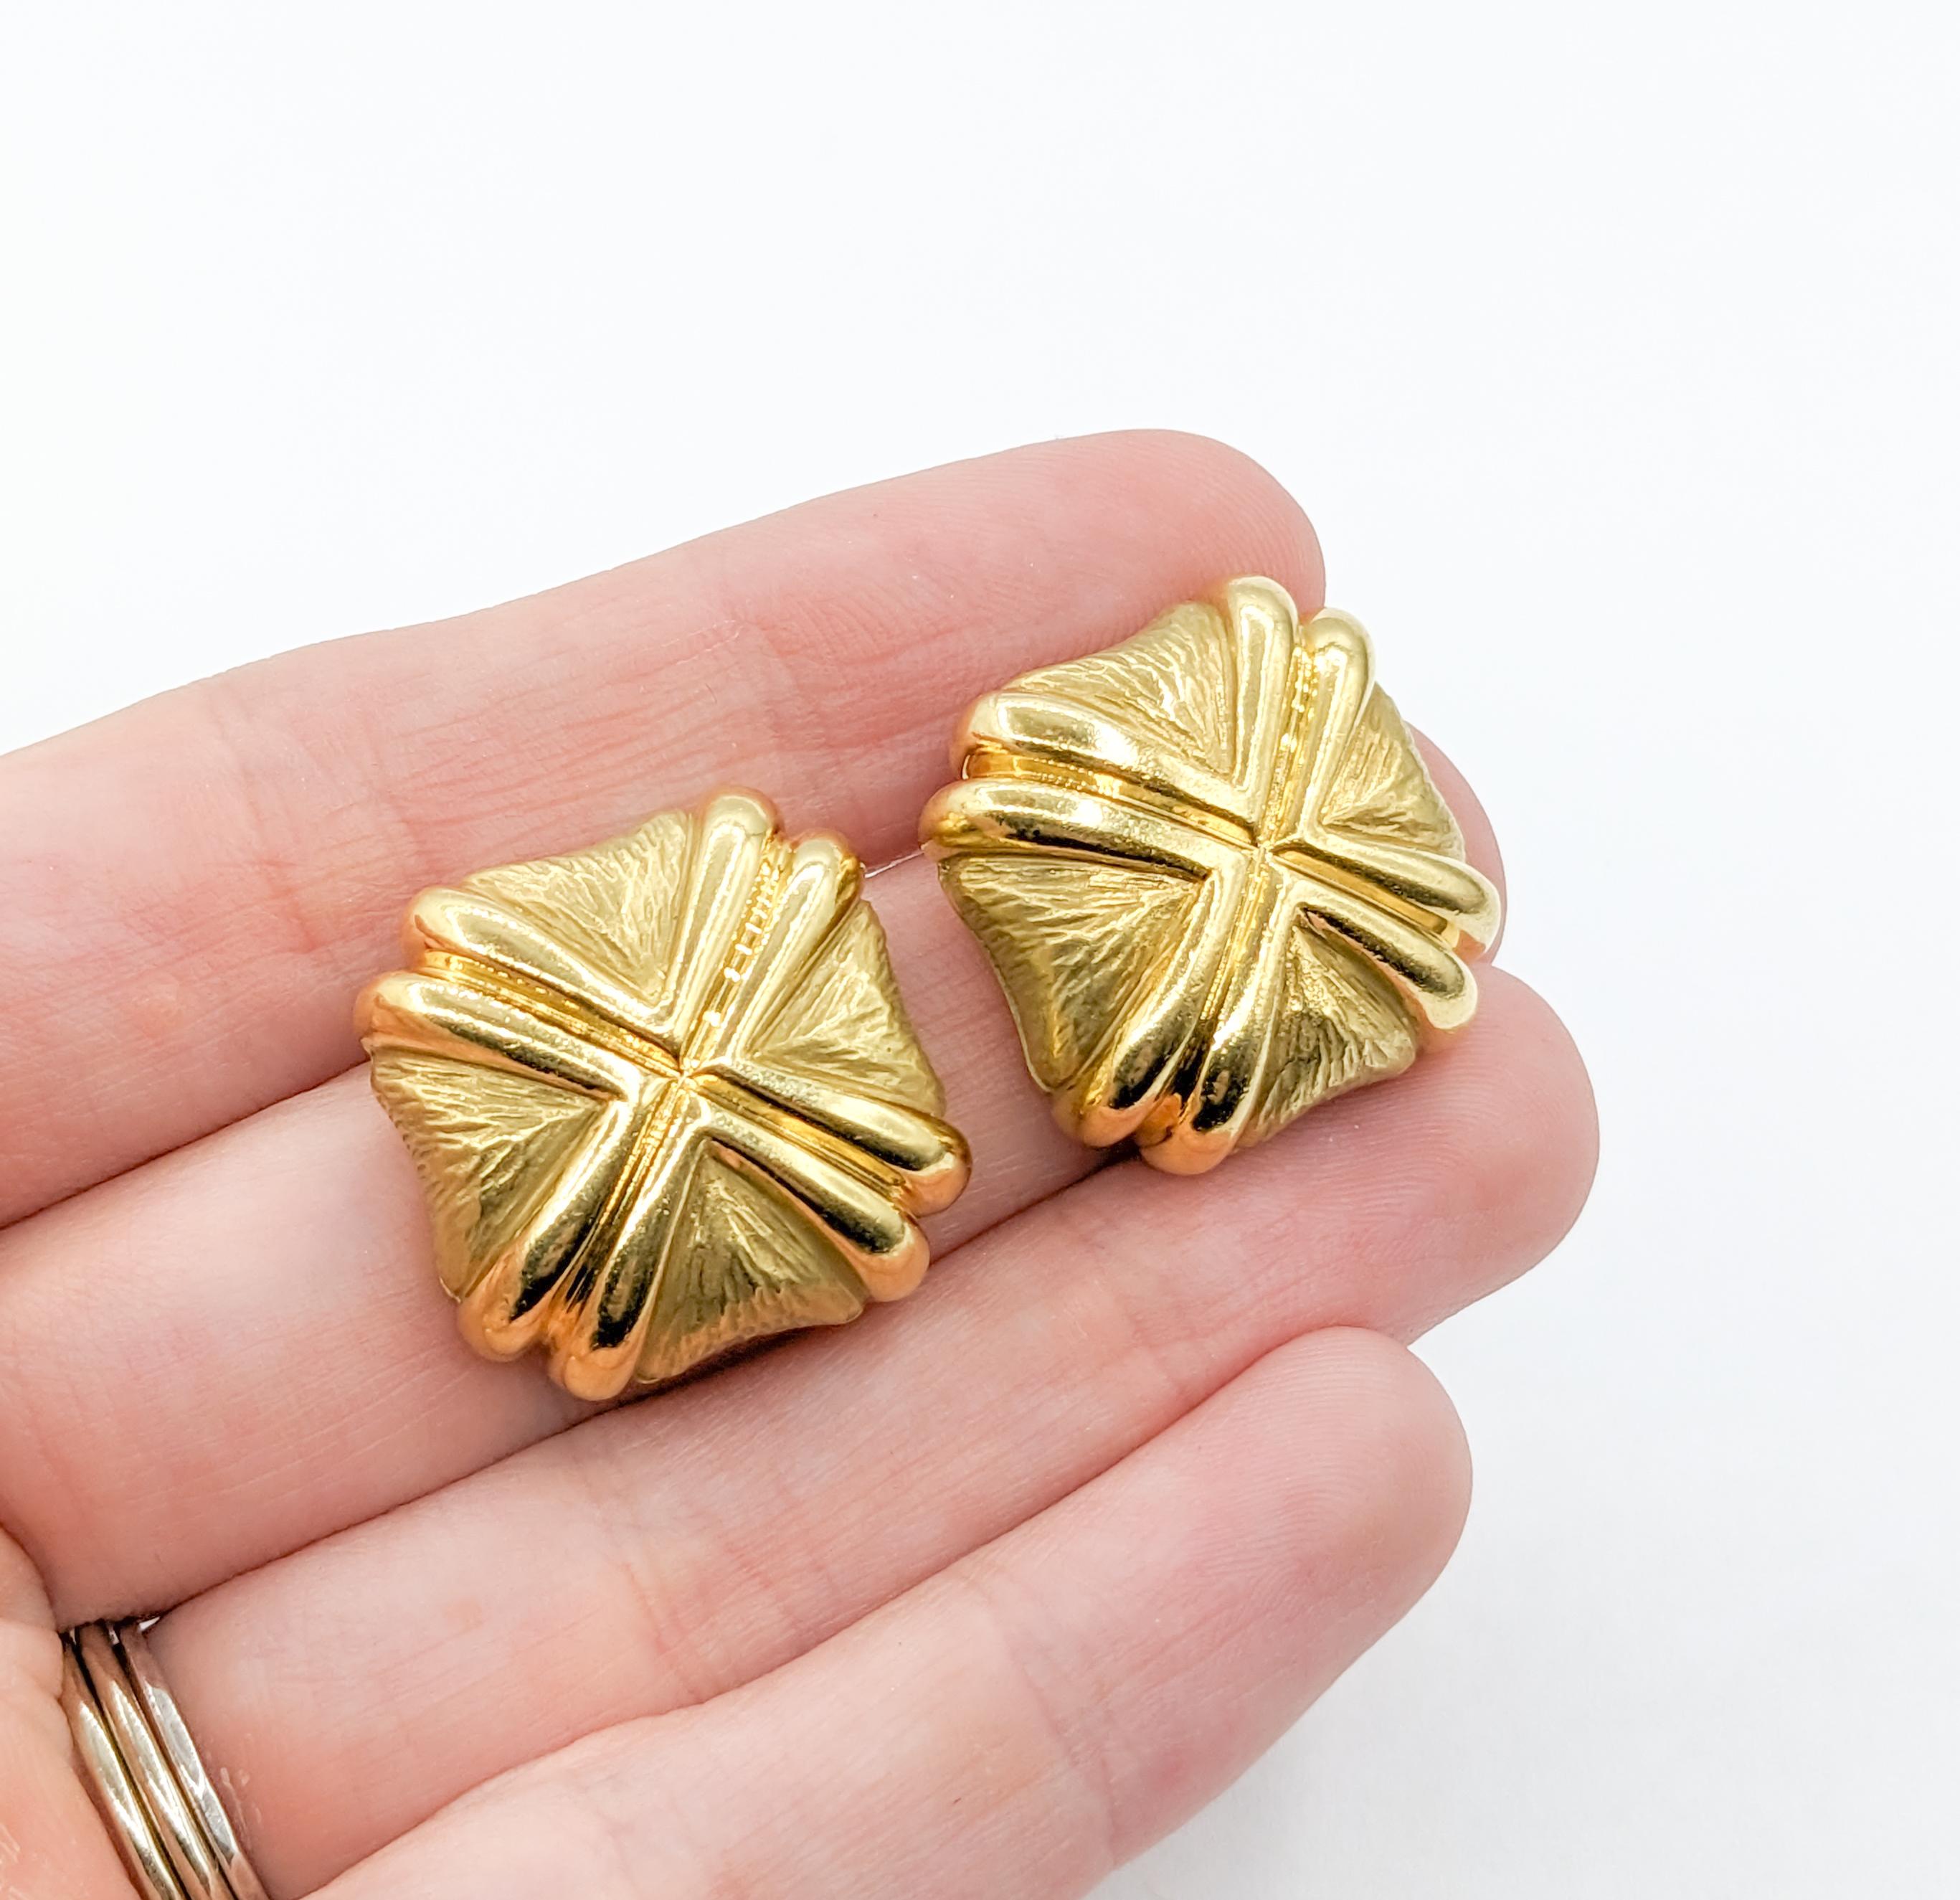 Retro Statement 18k Square X Clip On Earrings